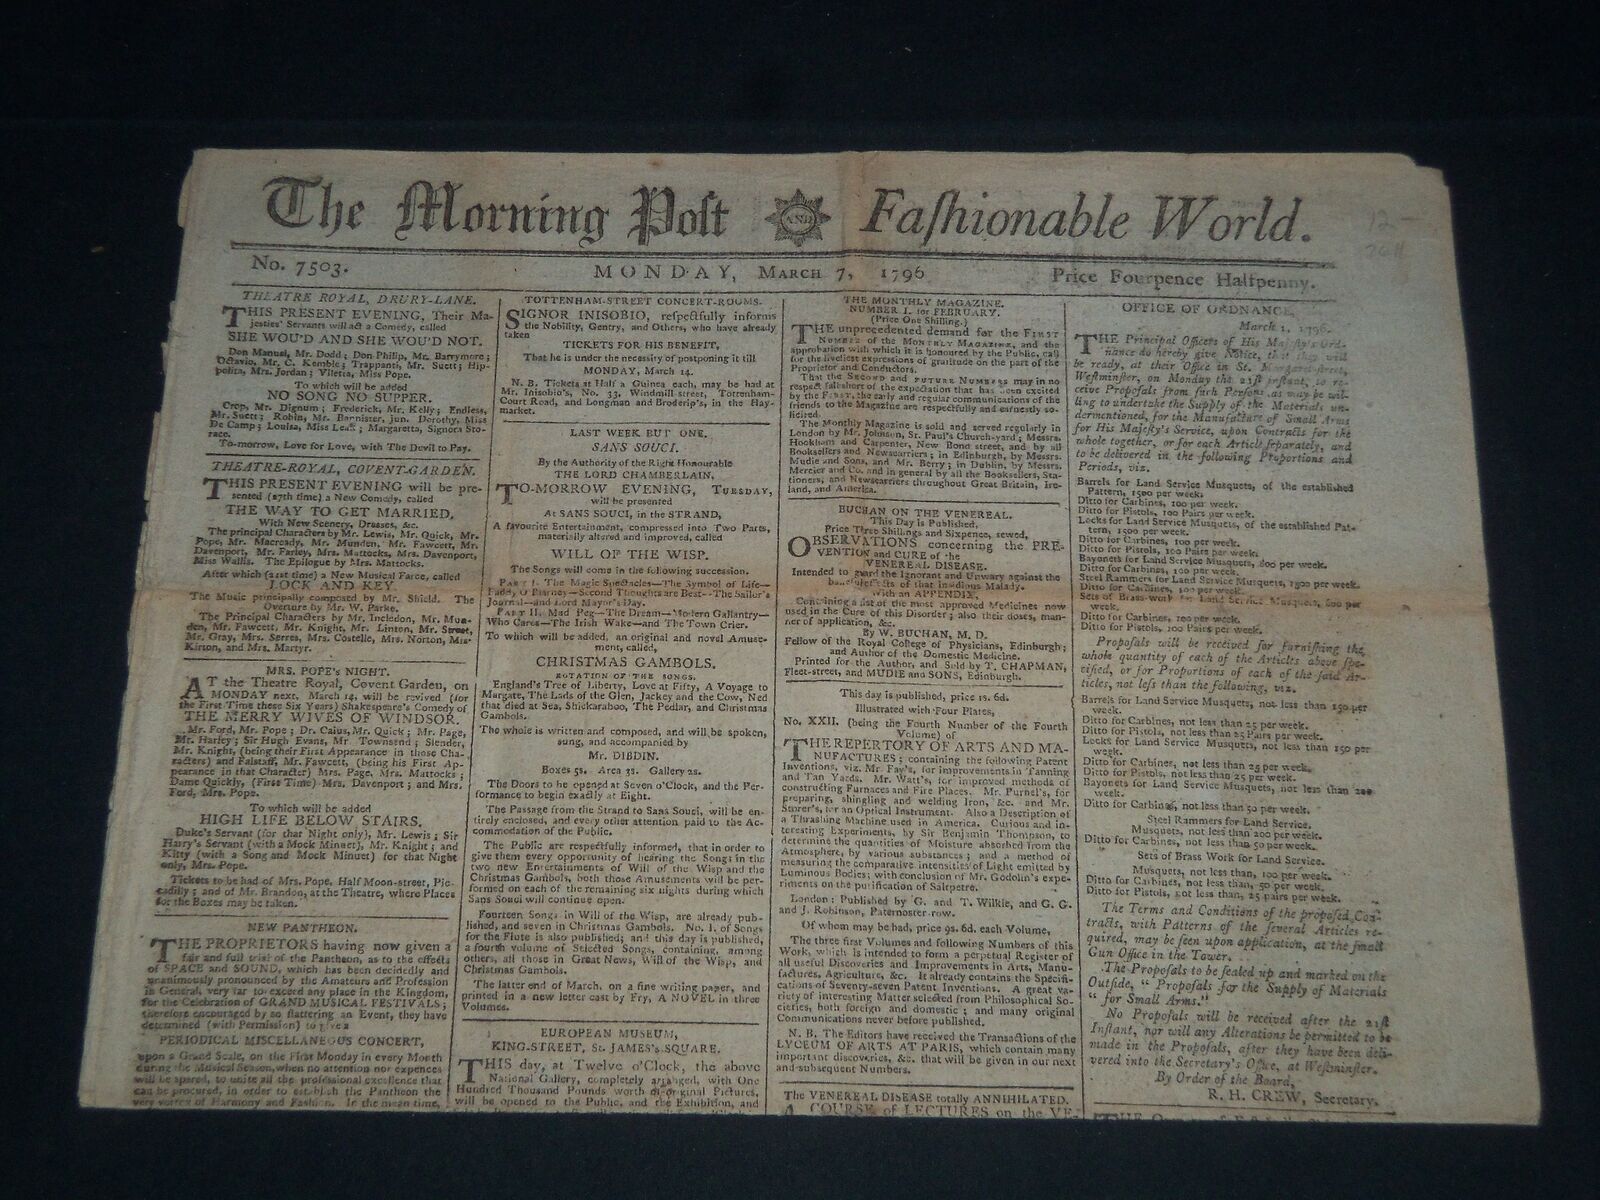 1796 MARCH 7 THE MORNING POST & FASHIONABLE WORLD NEWSPAPER - LONDON - NP 3658